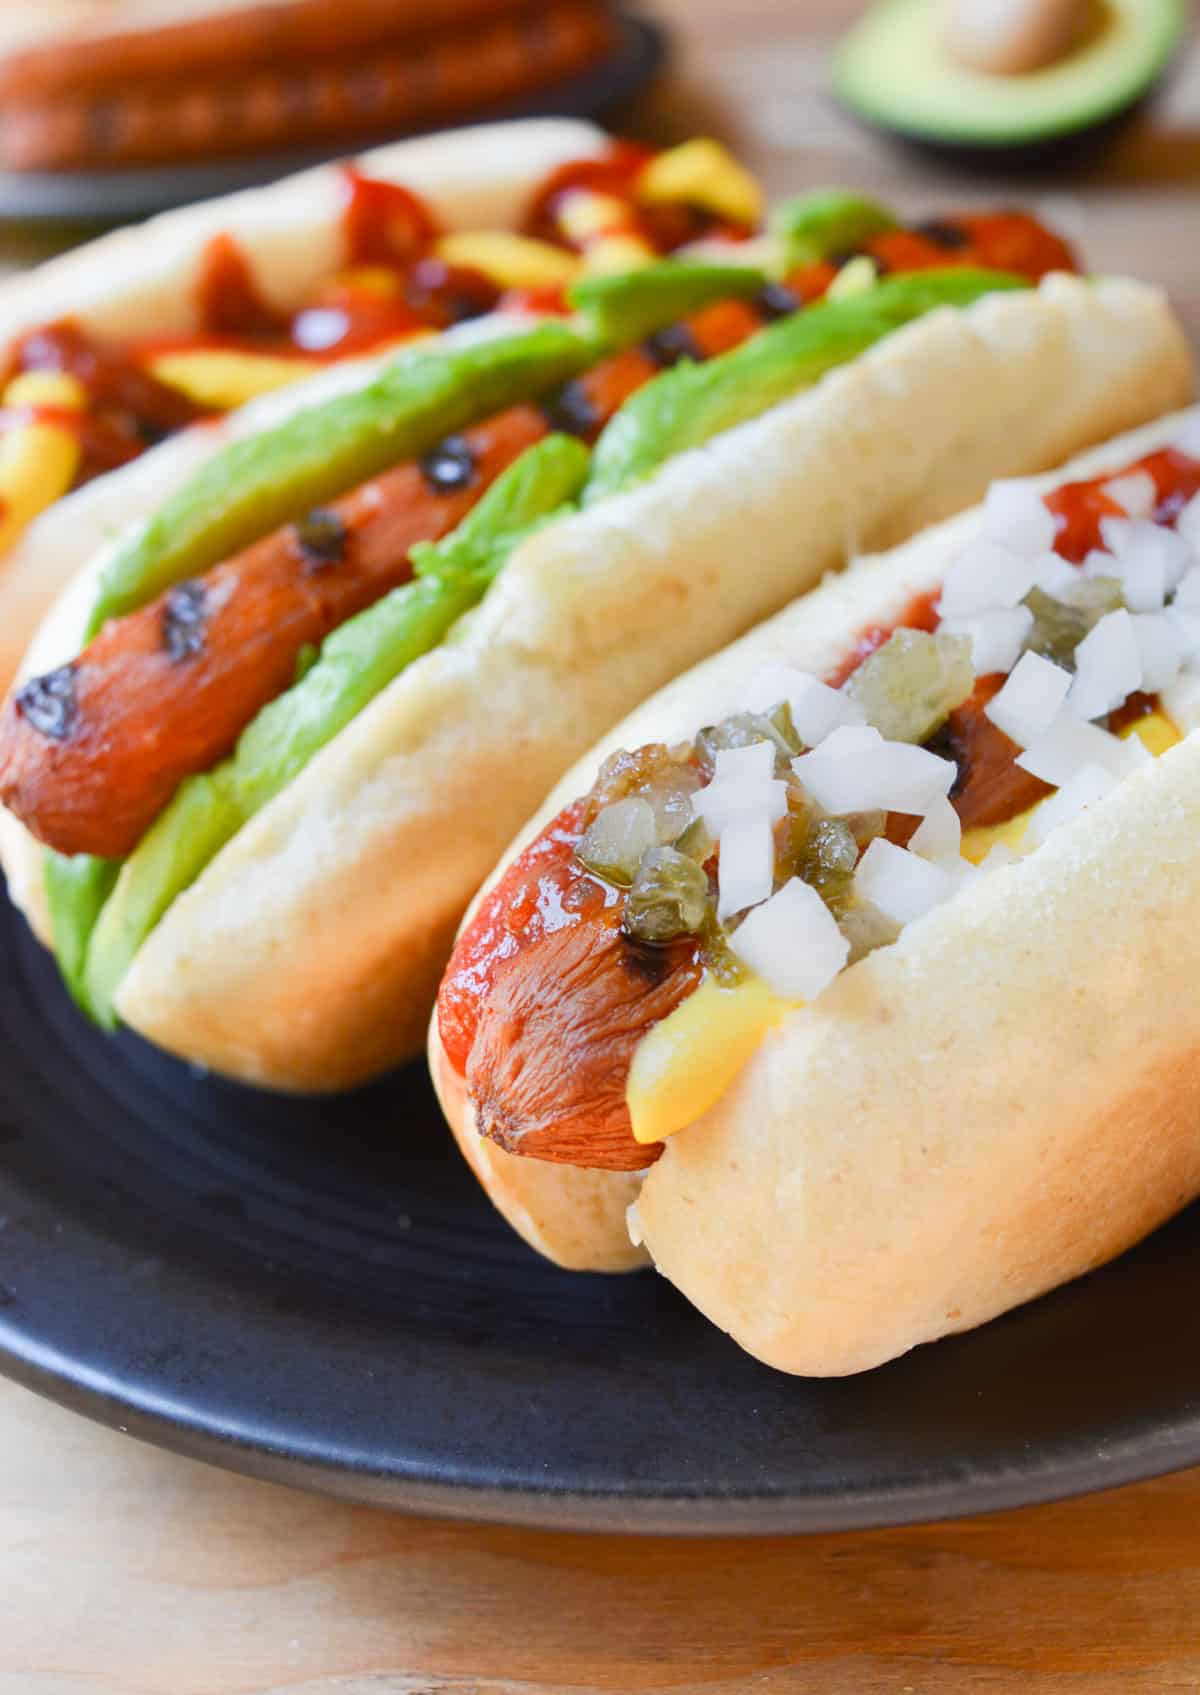 Three vegan carrots dogs topped with diced onion, relish, mustard, and ketchup on a black plate.